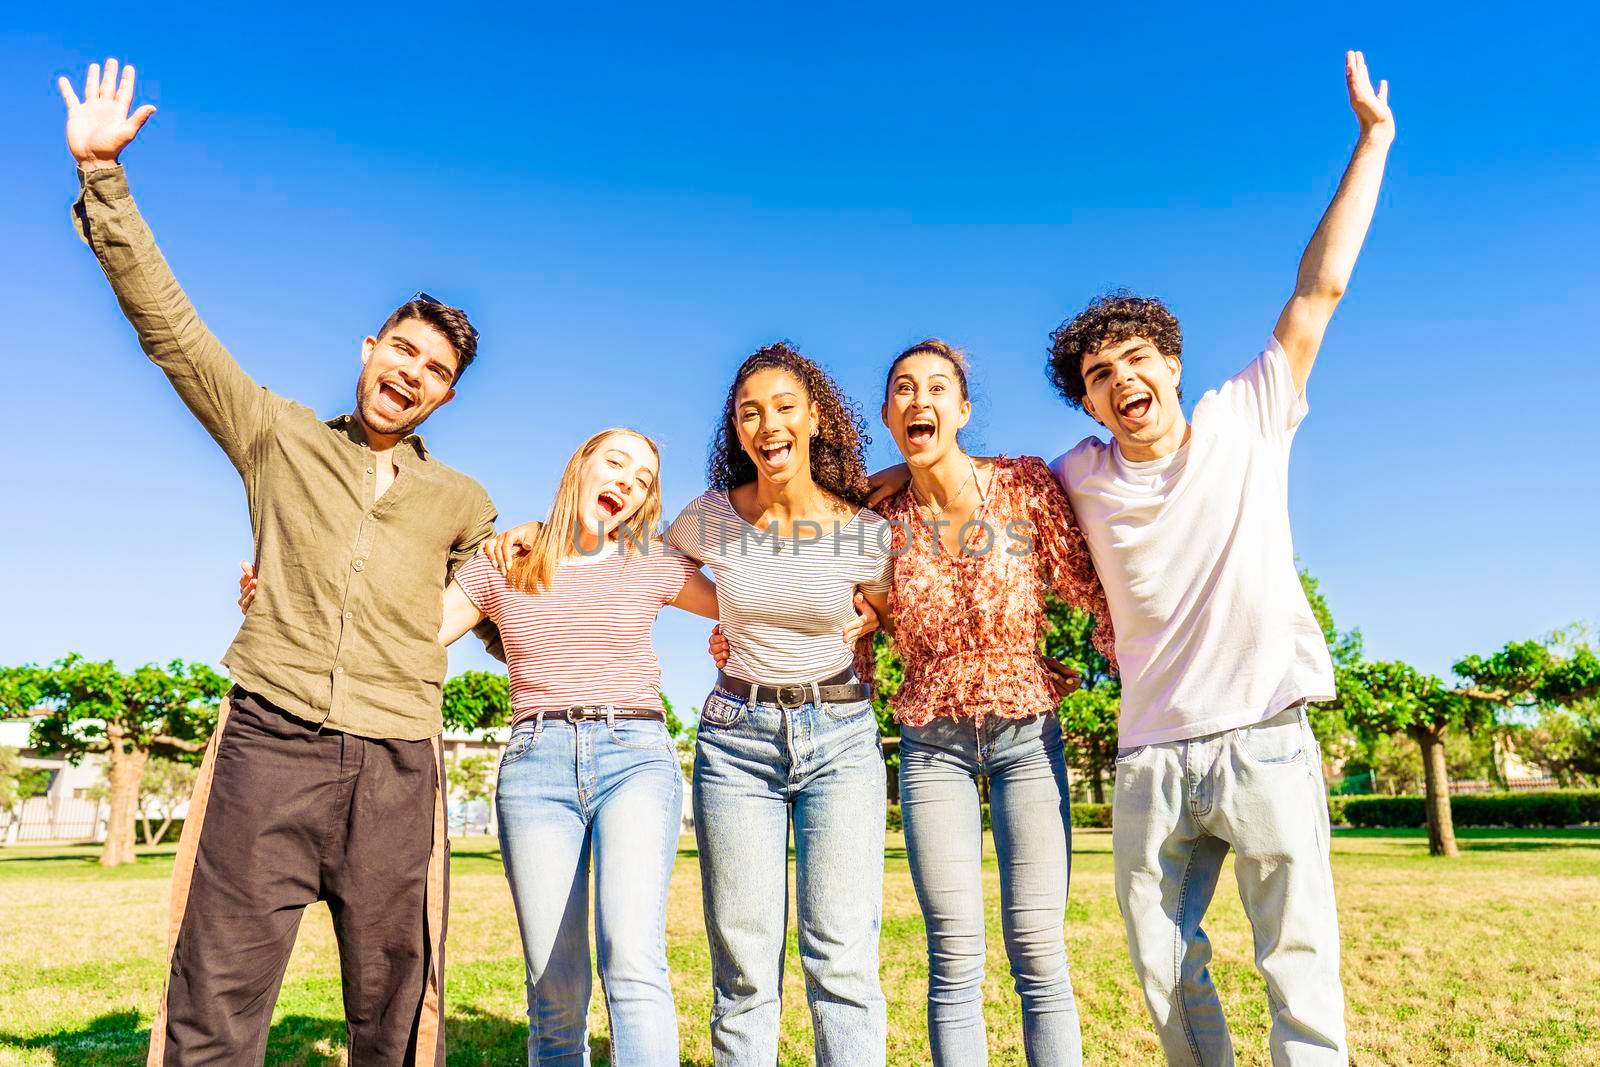 Multiracial group of young friends posing with raised open arms looking at camera embracing to each other in nature of city park. Happy diverse people having fun together enjoying life and success